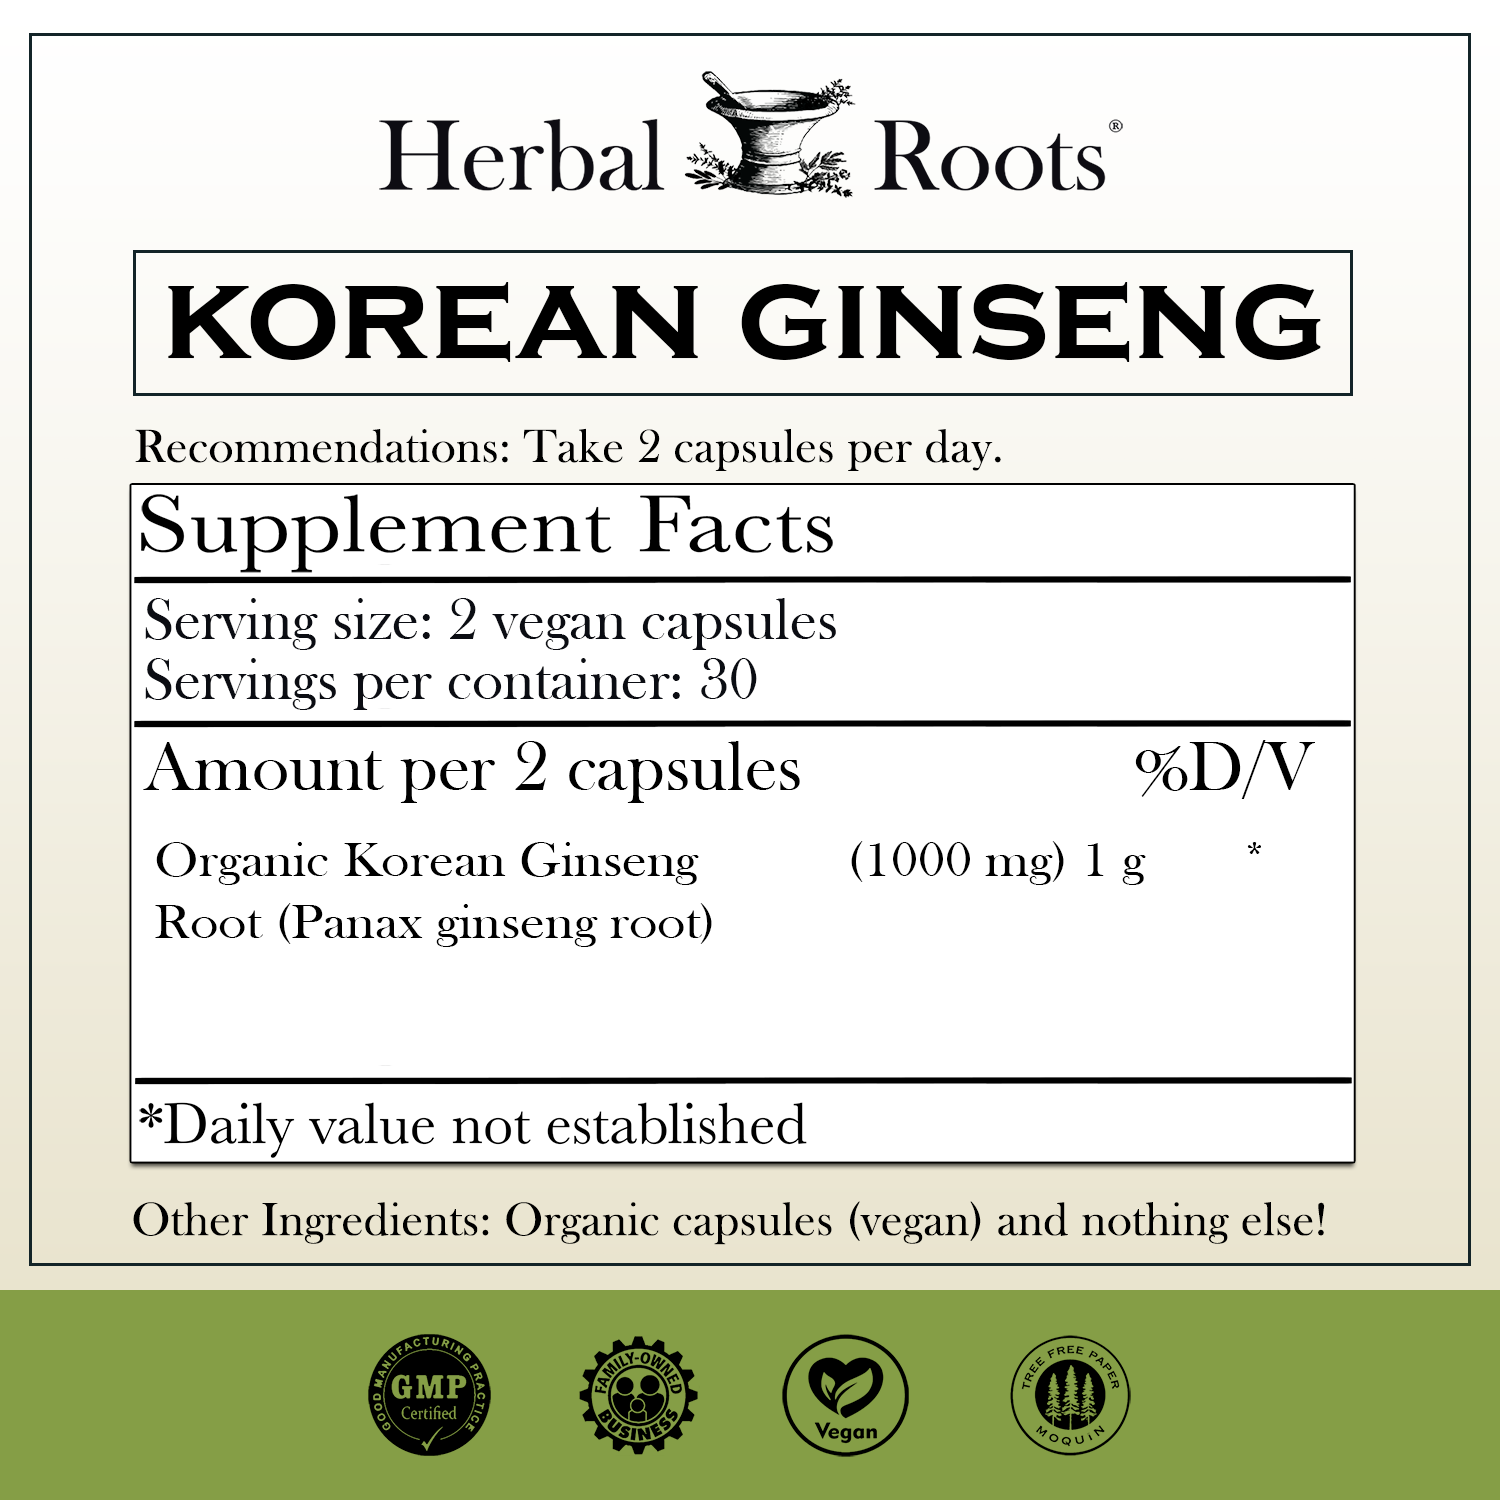 Supplement facts for Herbal Roots Korean Ginseng